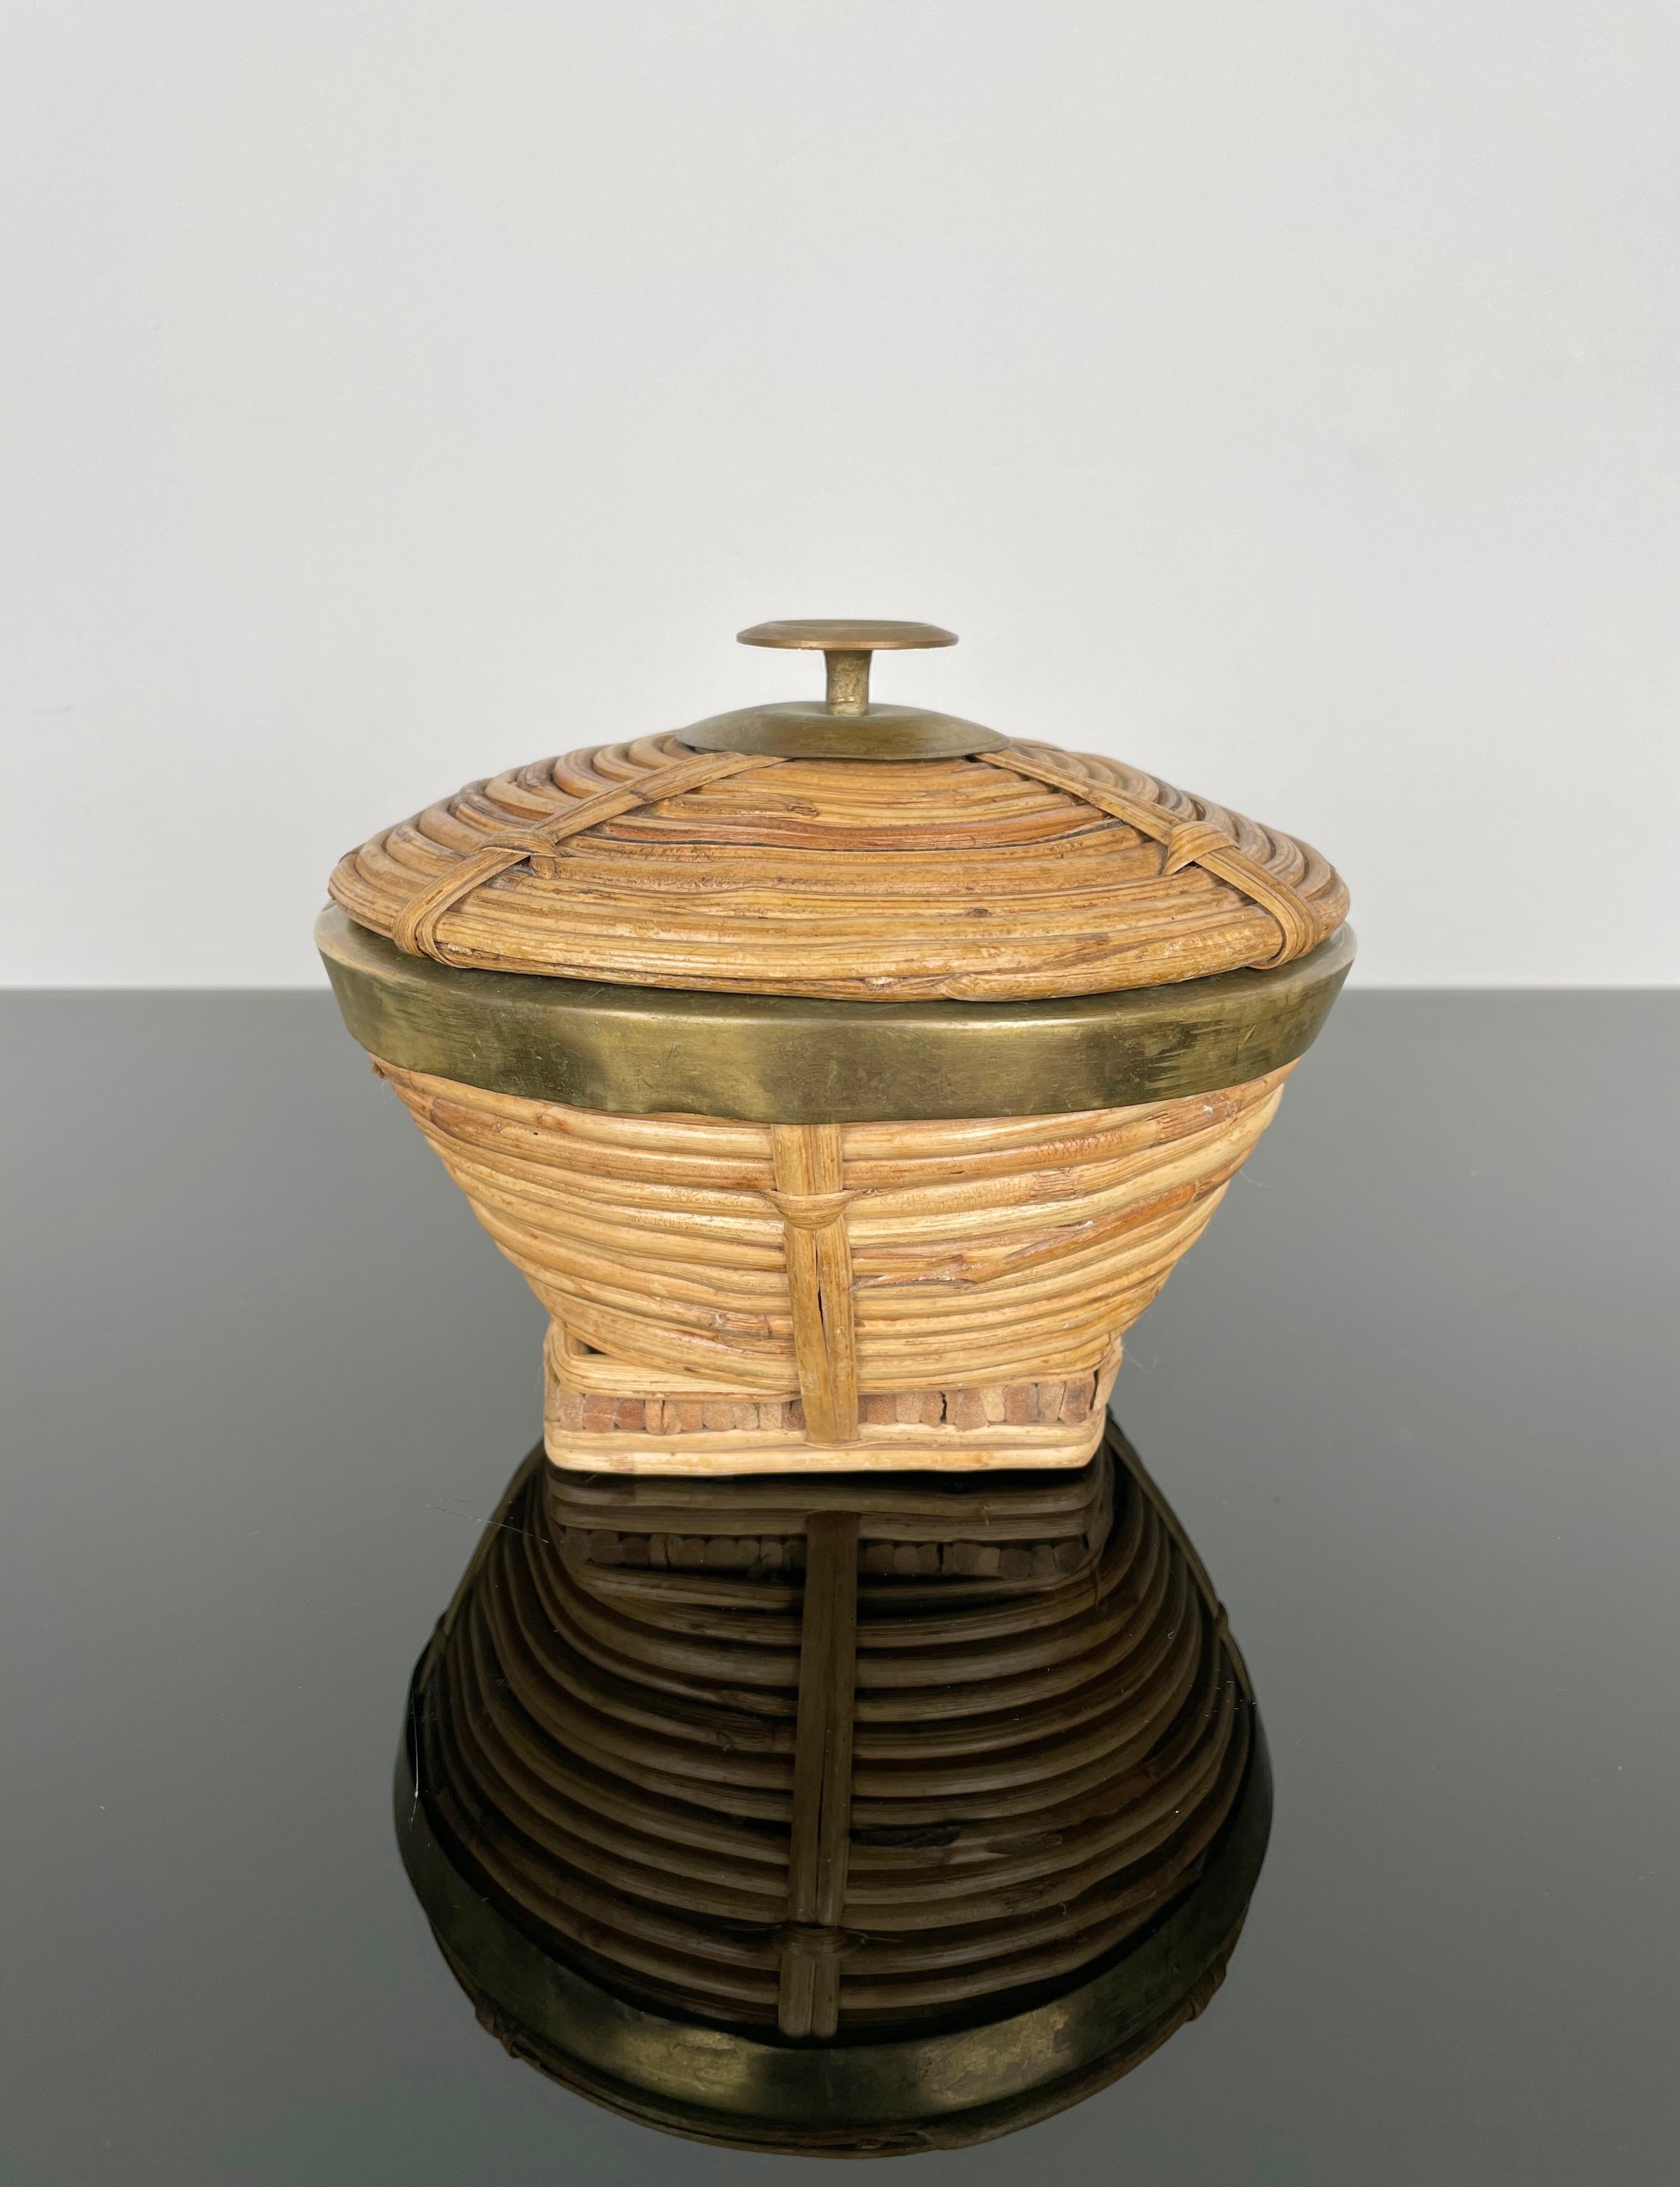 1960s rattan decorative box or bowl with cover featuring brass details made in Italy.